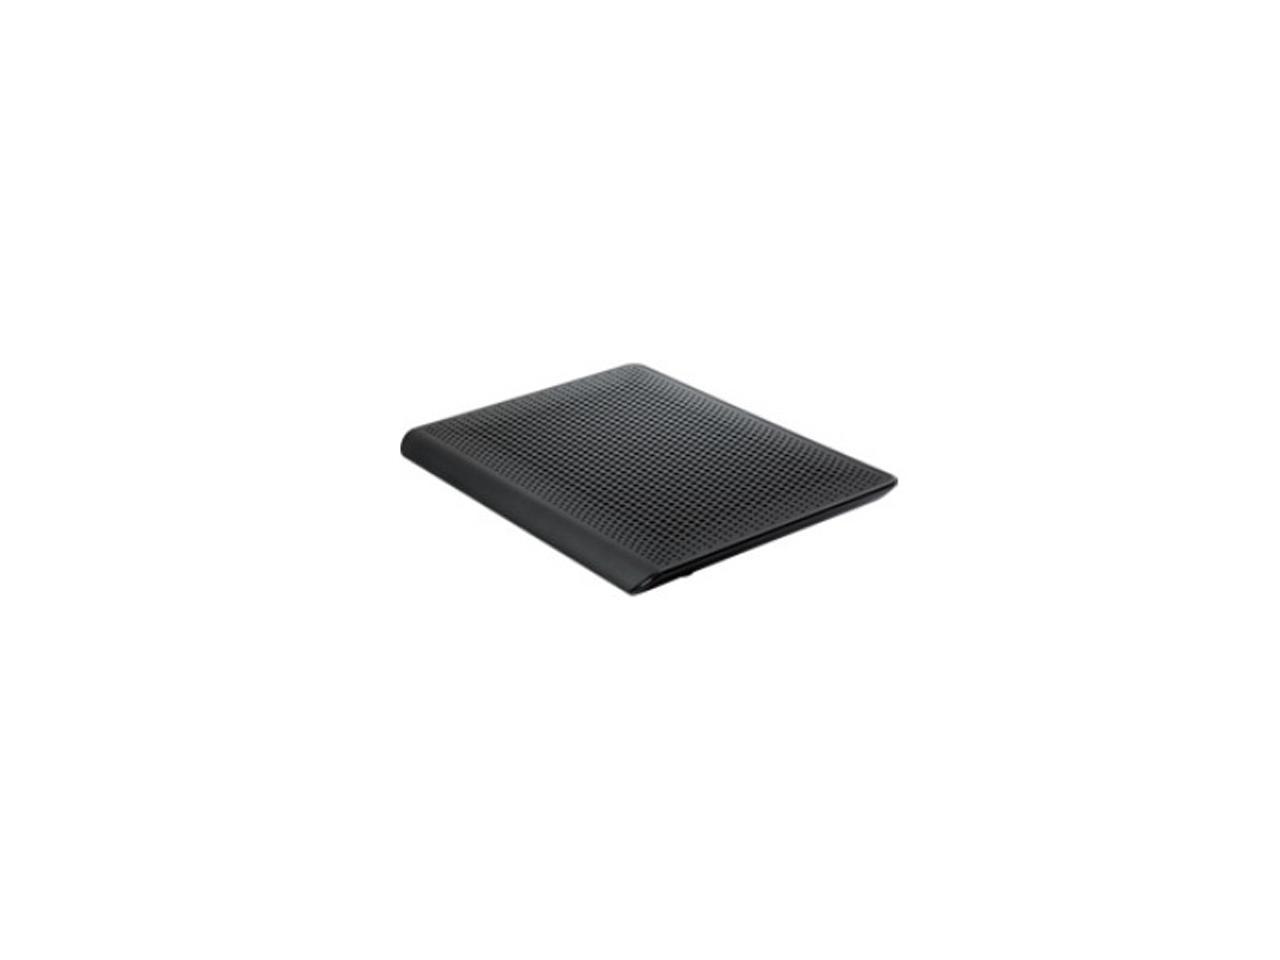 Black PA248U5 Targus Chill Mat for up to 16-Inch Laptop